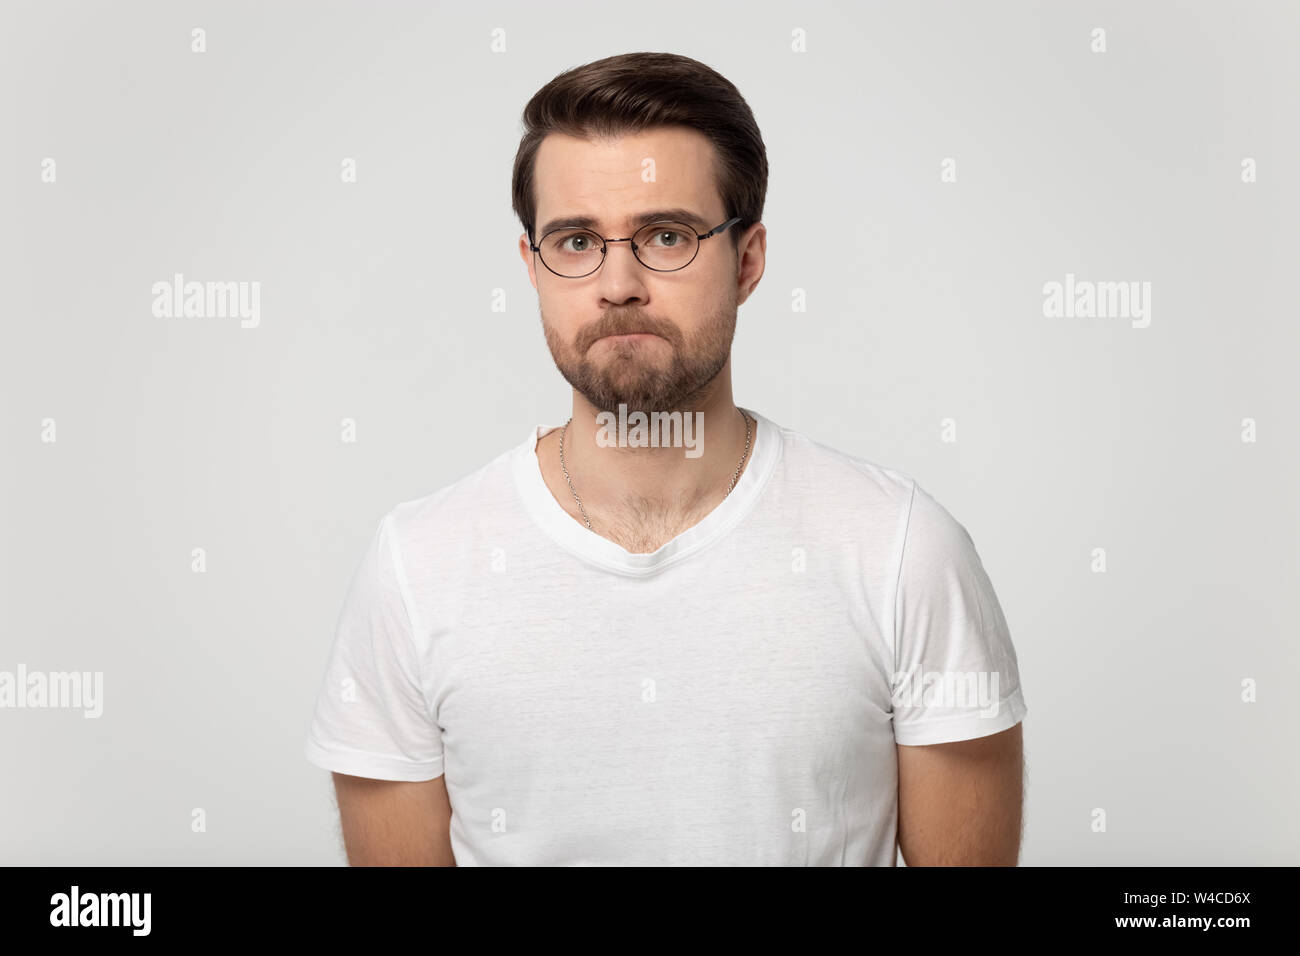 Upset guy with pursed lips posing isolated on gray background Stock ...